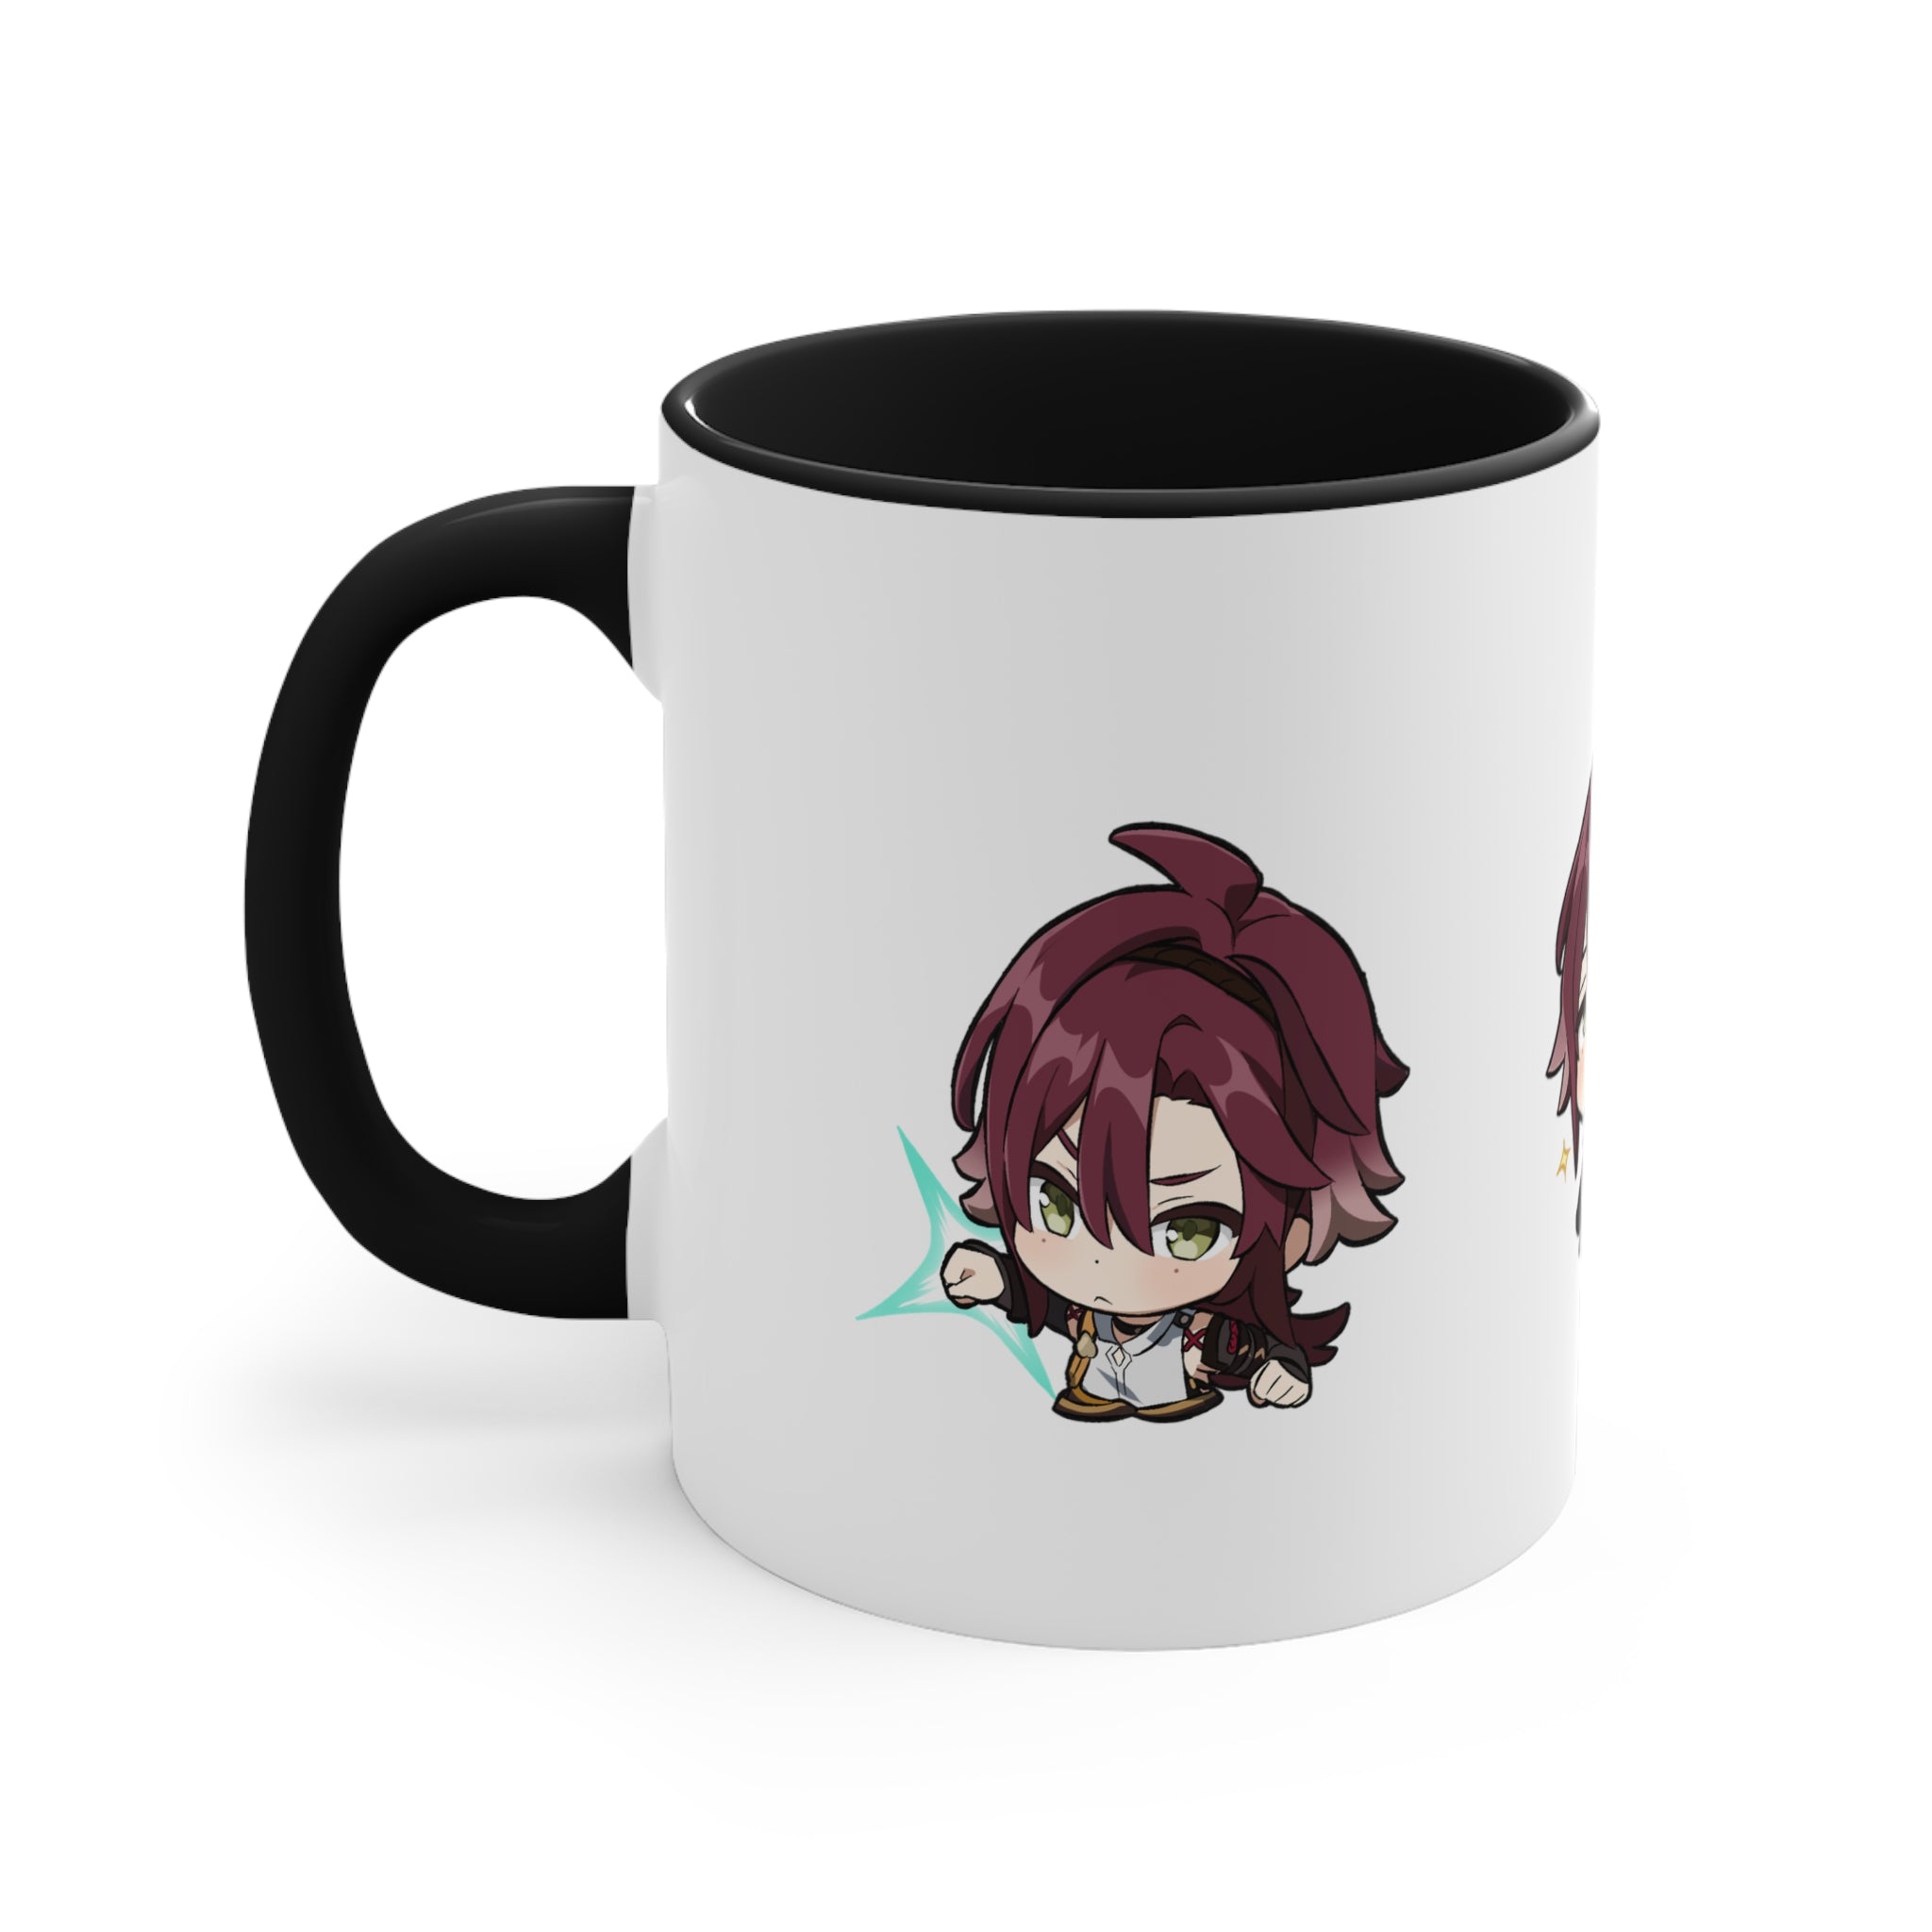 Heizou Genshin Impact Accent Coffee Mug, 11oz Cups Mugs Cup Gift For Gamer Gifts Game Anime Fanart Fan Birthday Valentine's Christmas